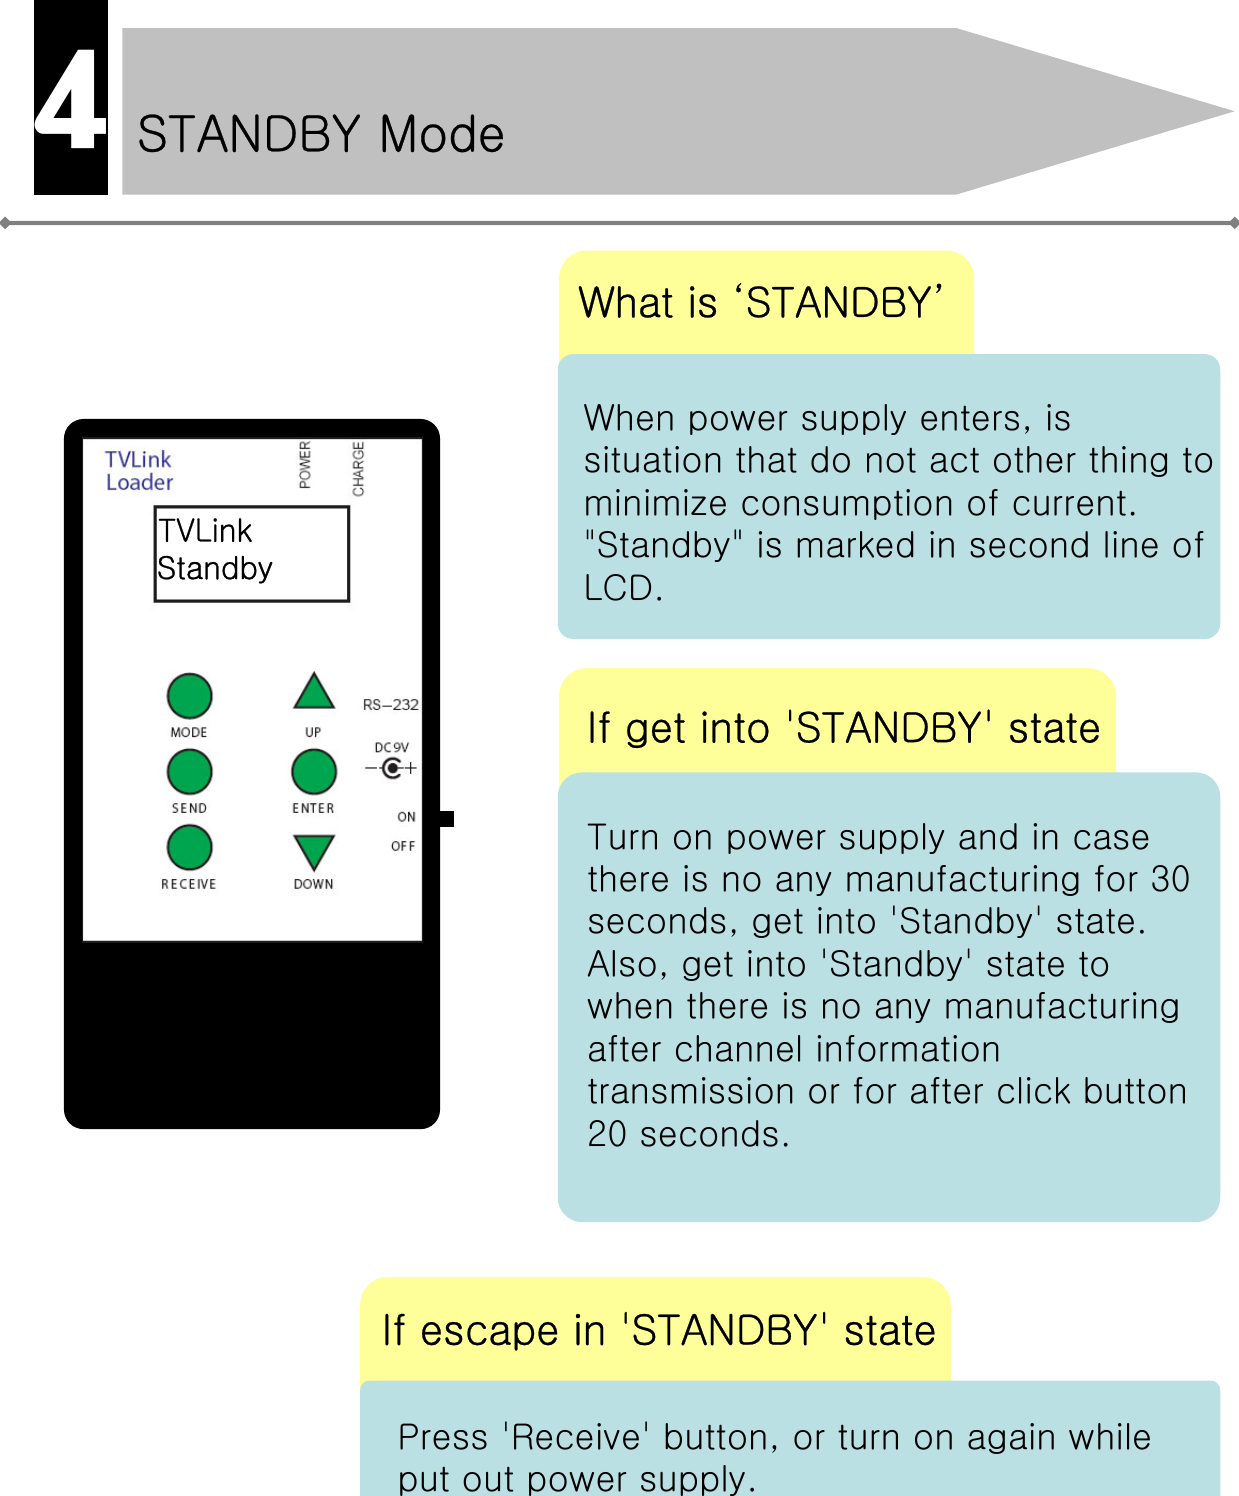 STANDBY Mode4What is ‘STANDBY’When power supply enters, is situation that do not act other thing to minimize consumption of current.&quot;Standby&quot; is marked in second line of LCD.If get into &apos;STANDBY&apos; stateTurn on power supply and in case there is no any manufacturing for 30 seconds, get into &apos;Standby&apos; state.Also, get into &apos;Standby&apos; state to when there is no any manufacturing after channel information transmission or for after click button 20 seconds.If escape in &apos;STANDBY&apos; statePress &apos;Receive&apos; button, or turn on again while put out power supply.TVLinkStandby